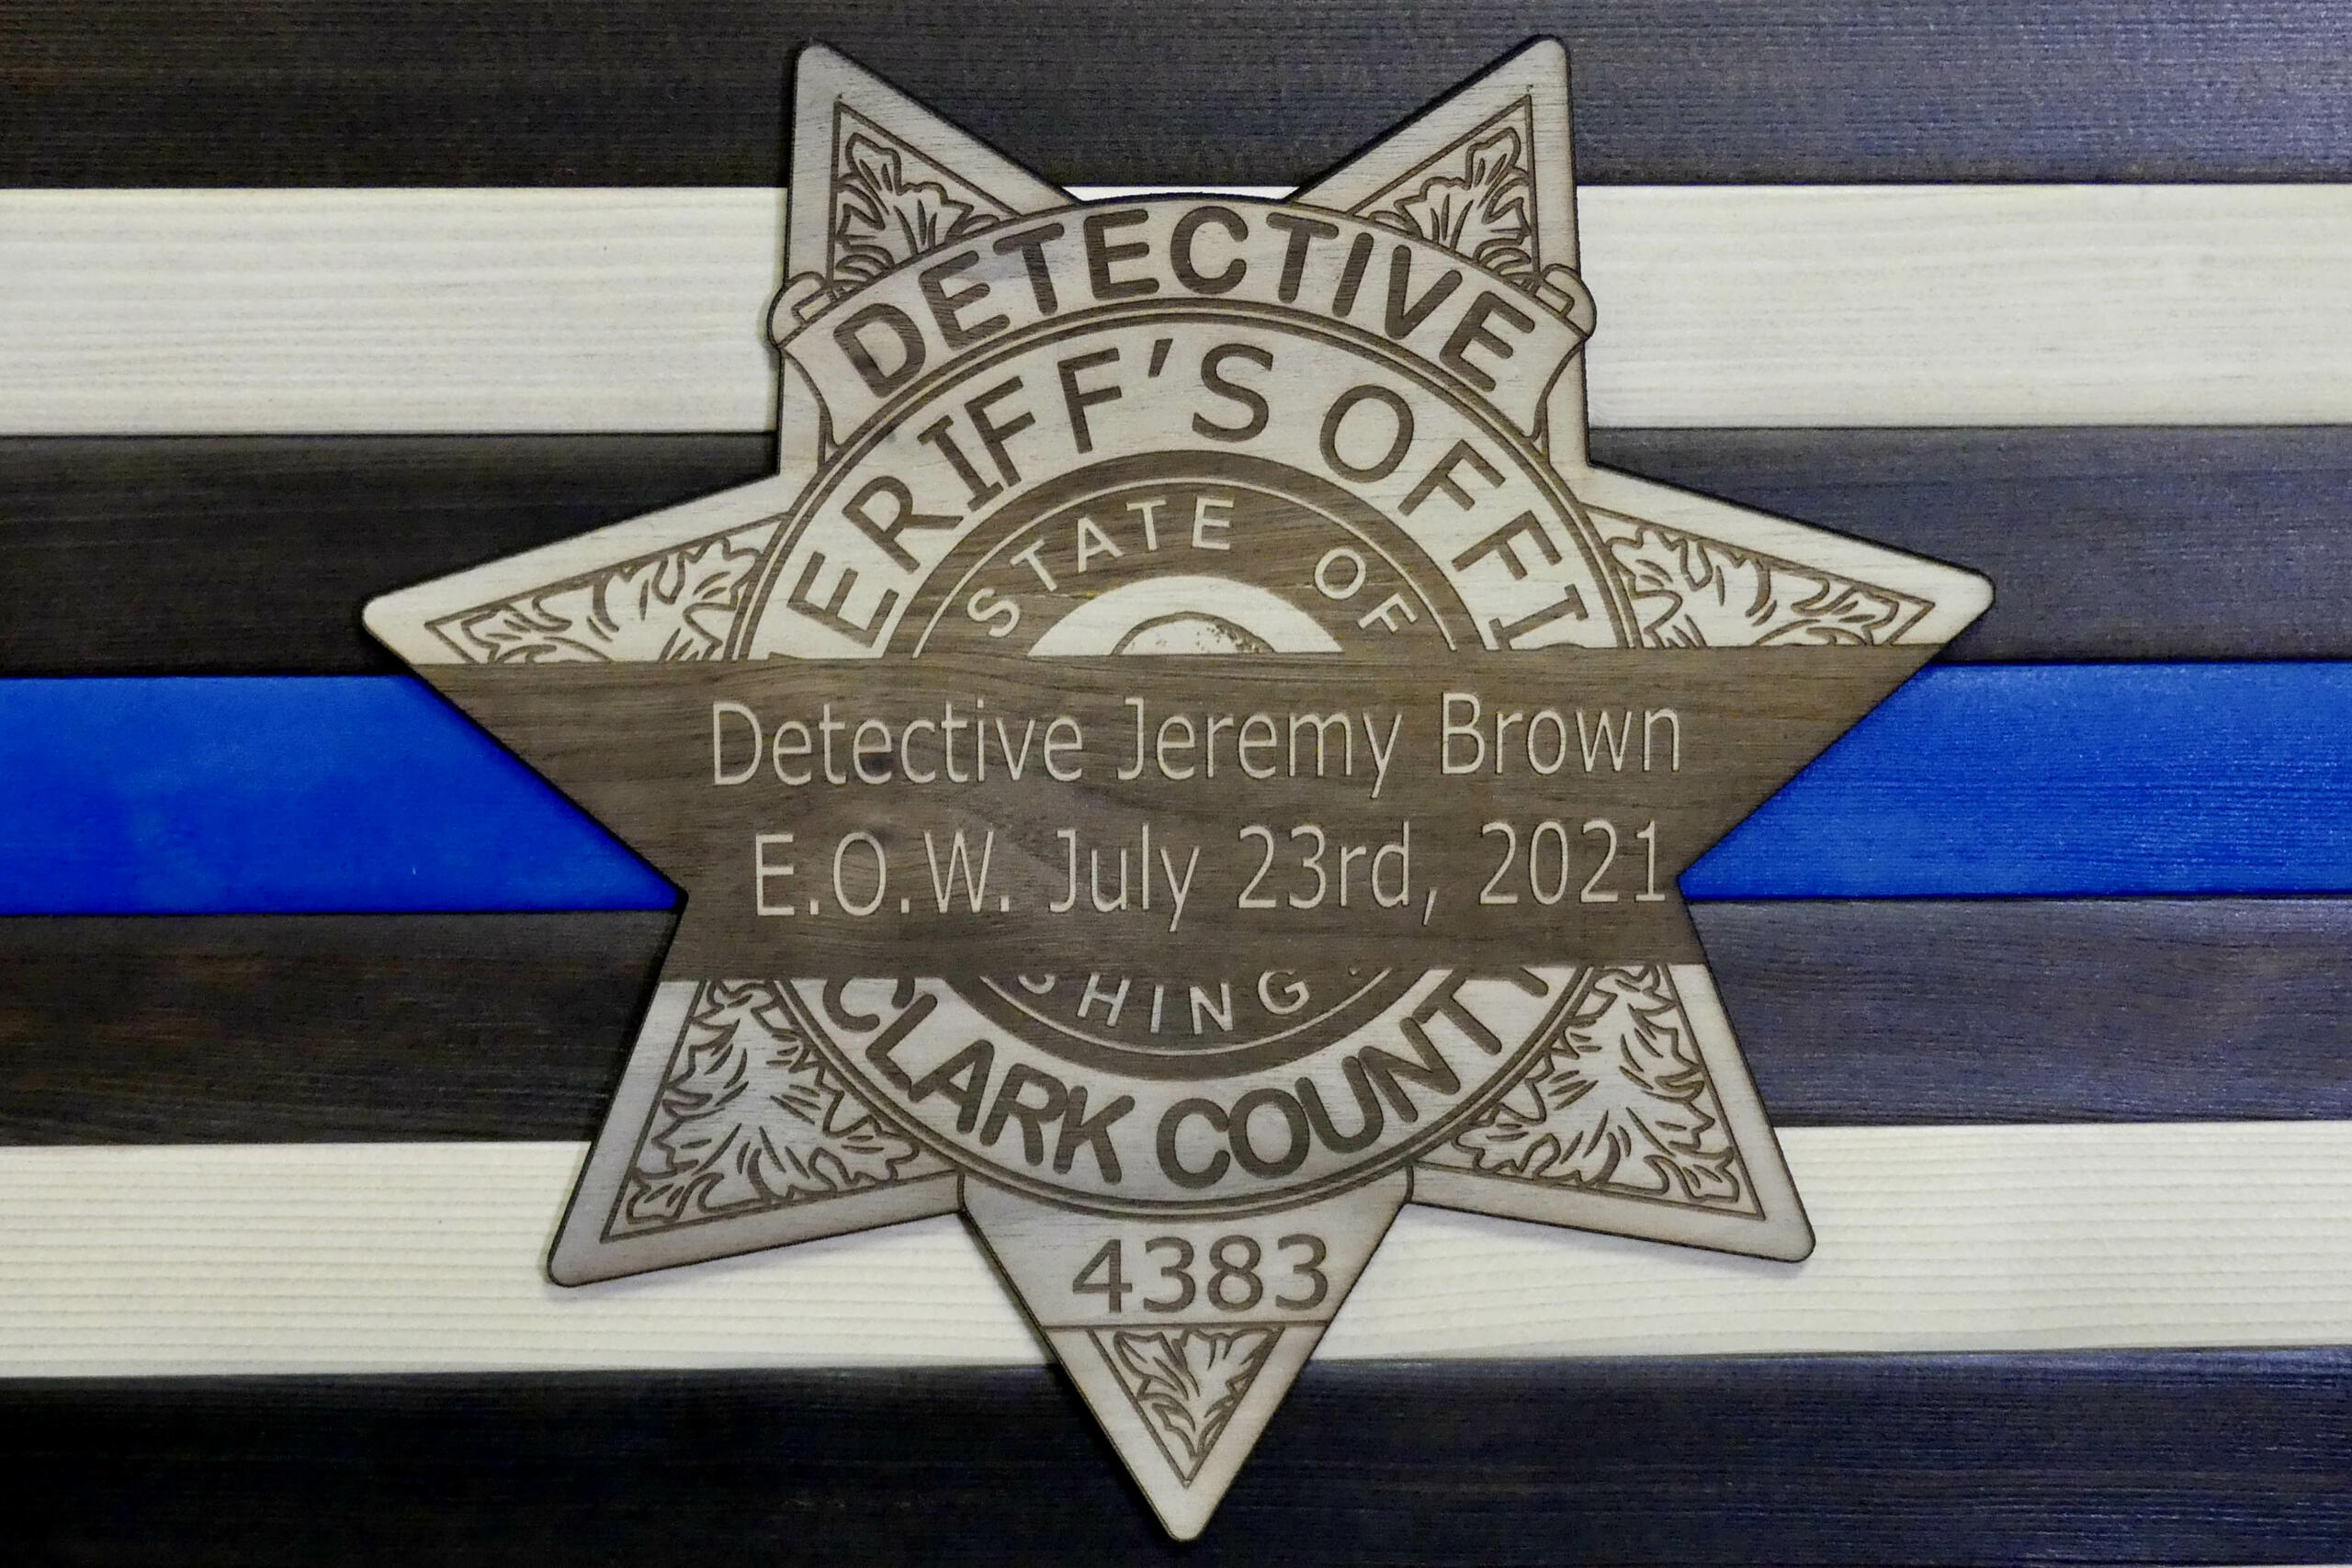 Aftermath of fatal shooting of Clark County detective photo gallery